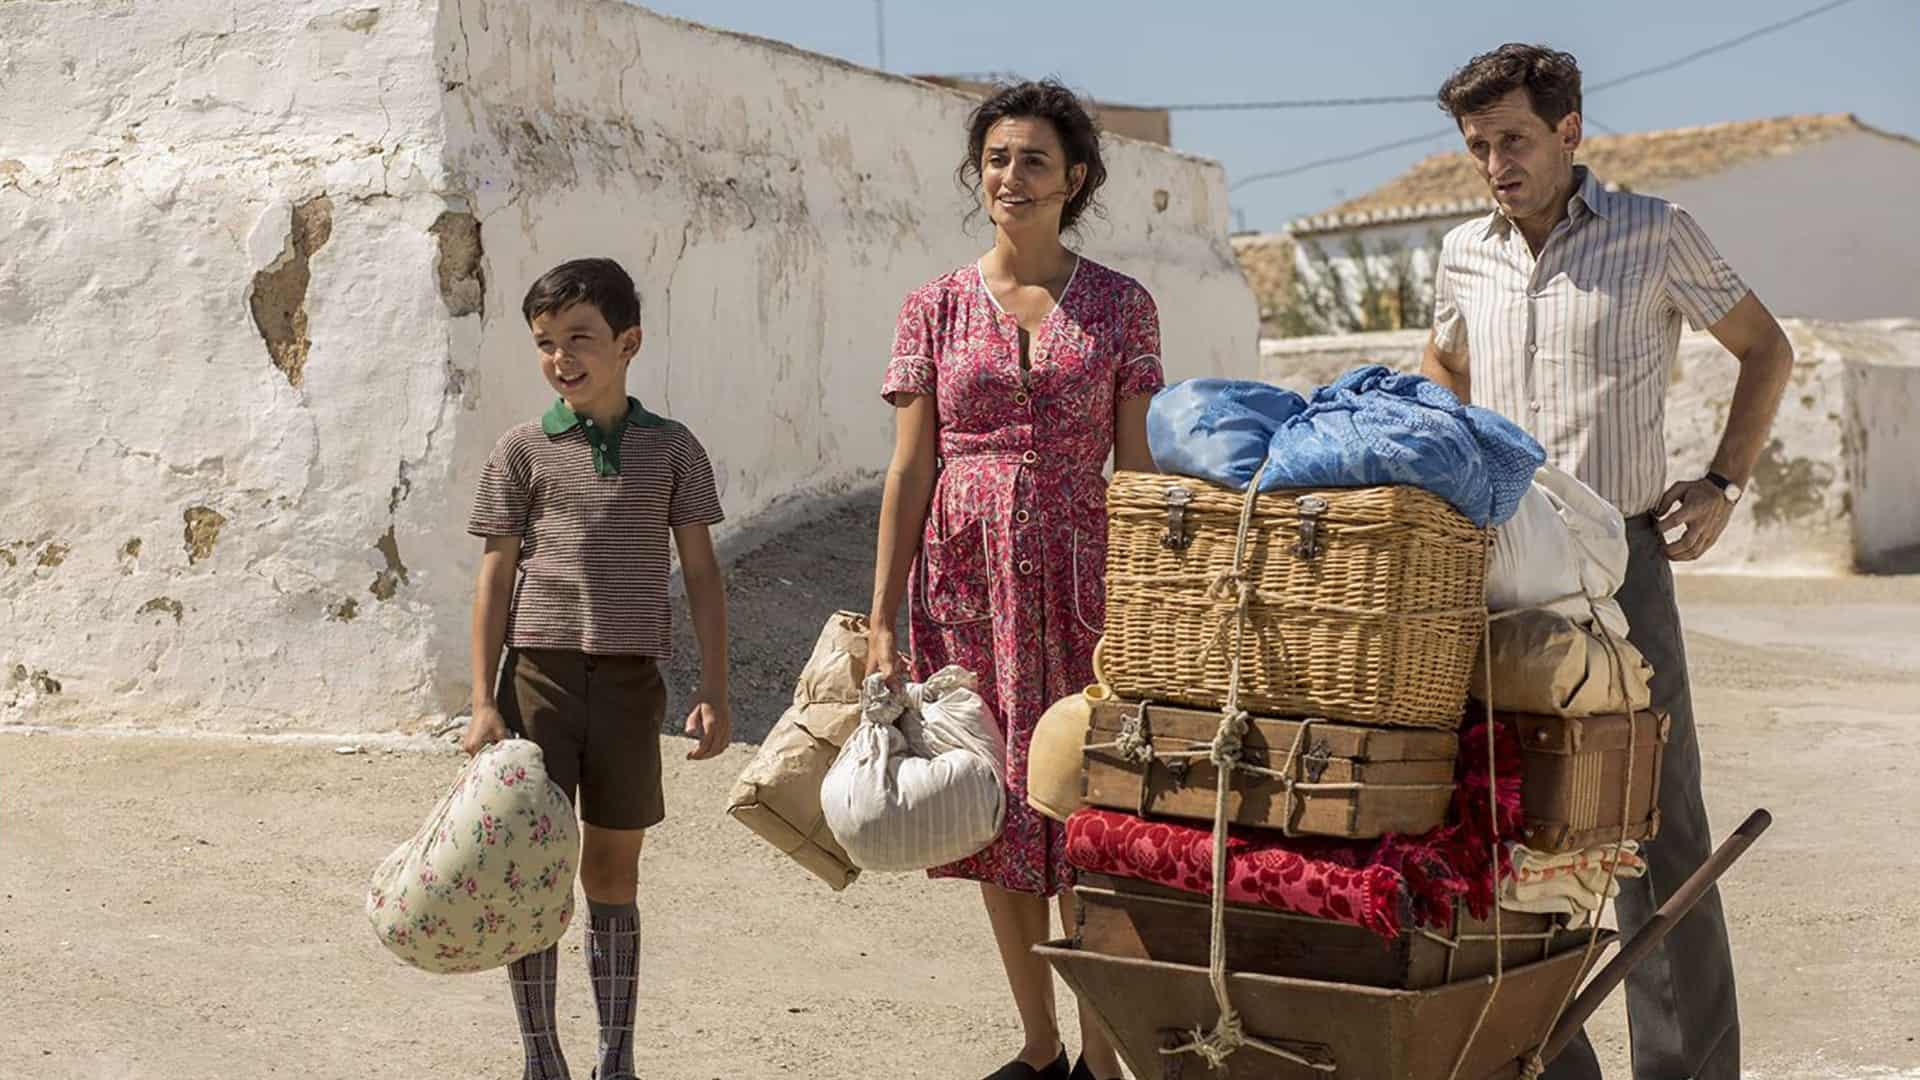 Salvador, Jacinta, and Venancio stand beside their belongings as they admire their new home in this image from Sony Pictures Classics